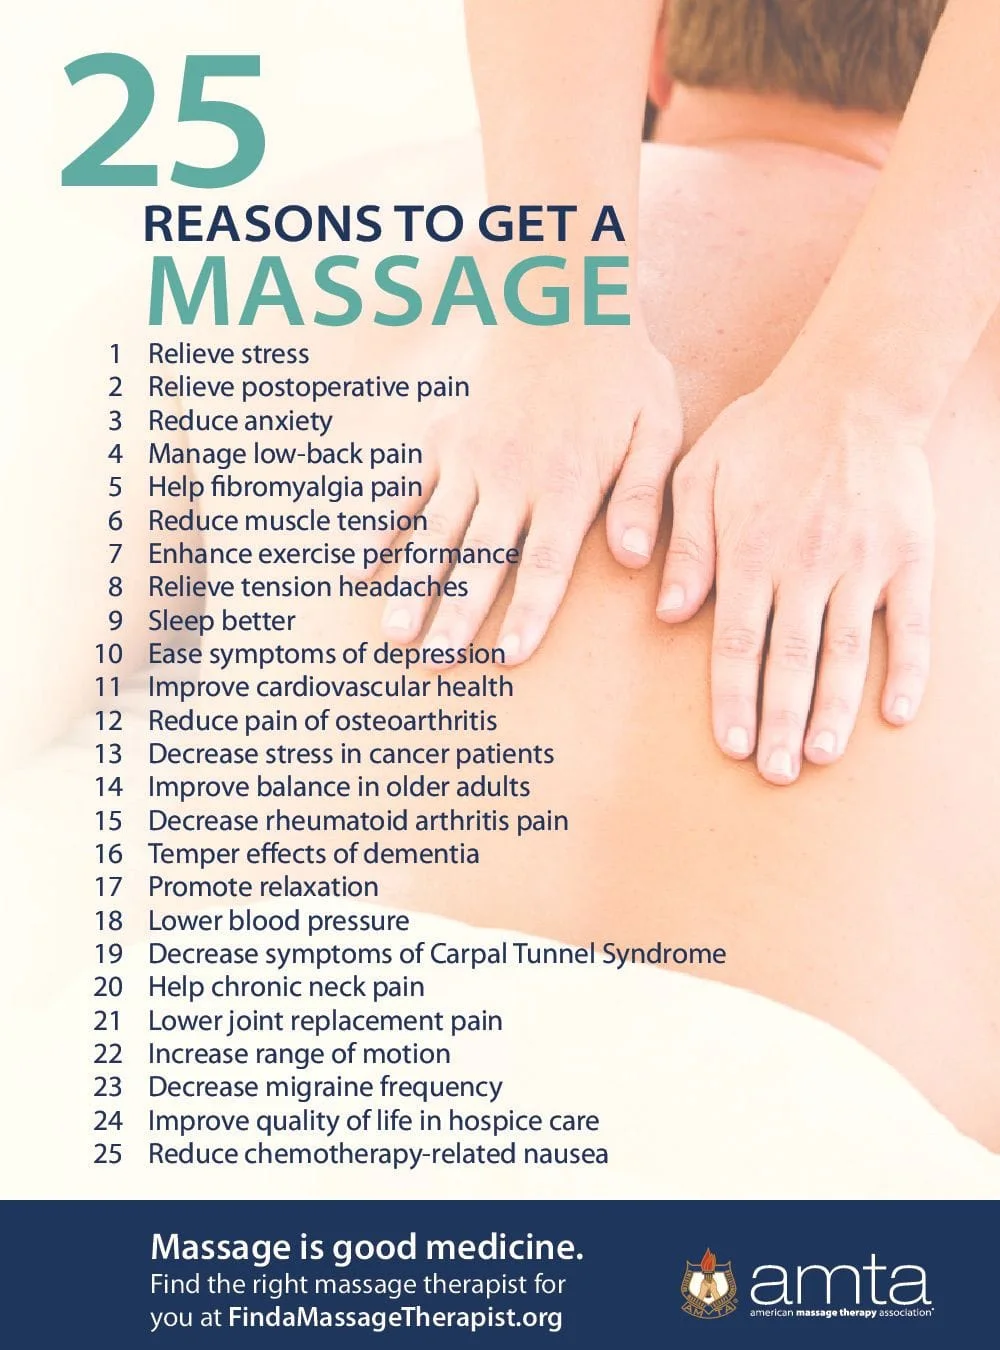 25 reasons for massage